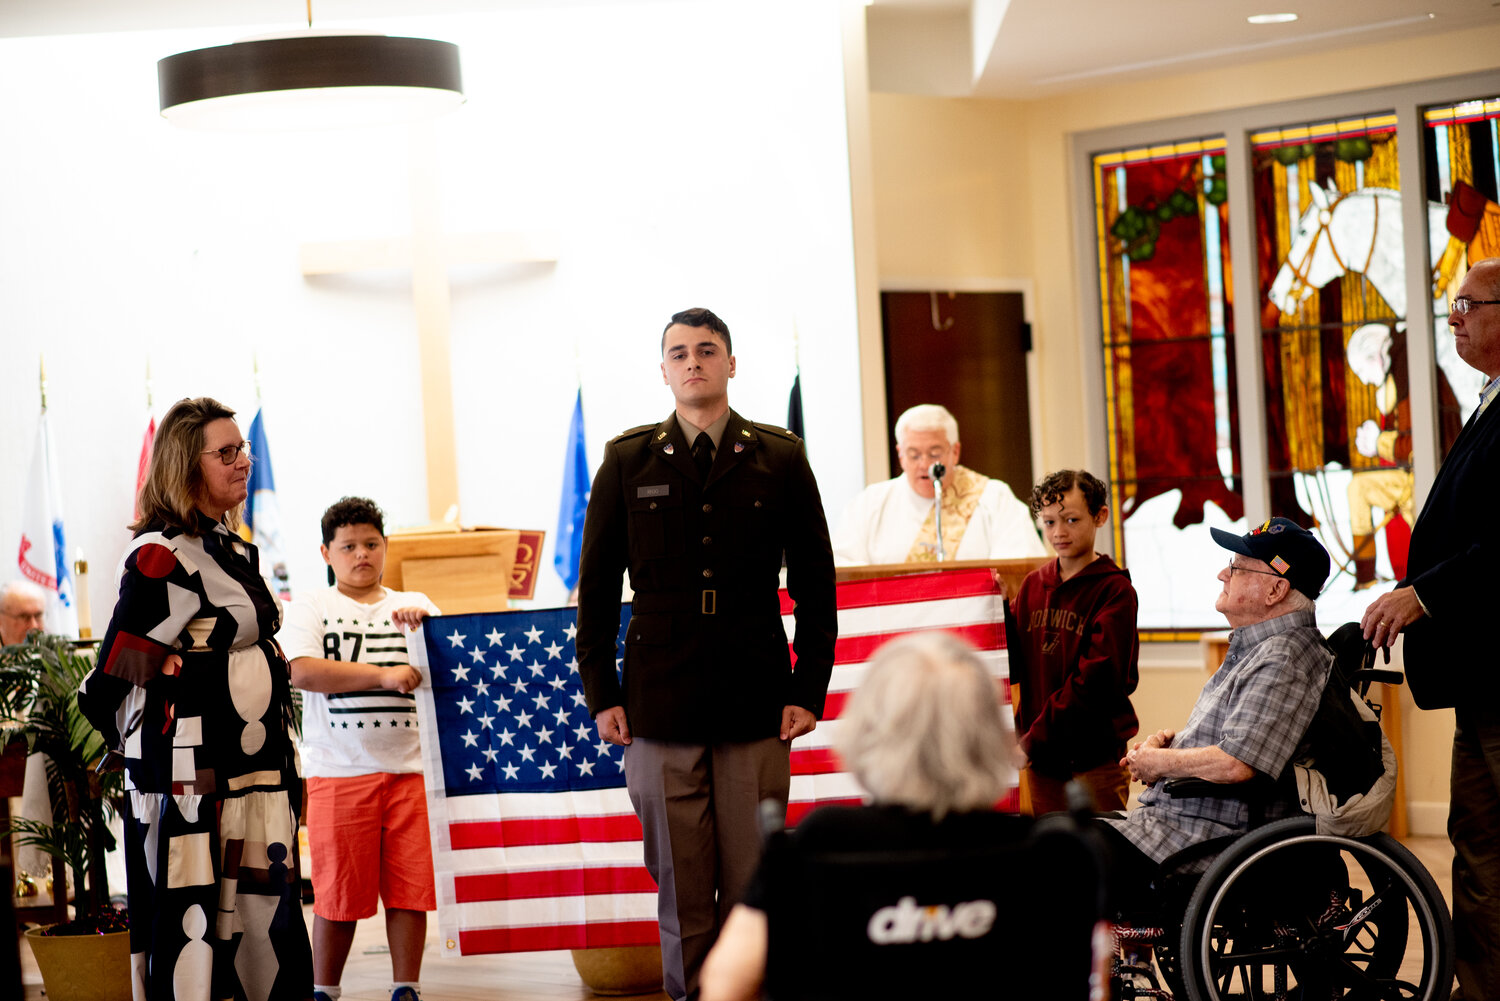 Chris Rego stands at attention during the ceremony on May 7 at the Rhode Island Veterans Home in Bristol.